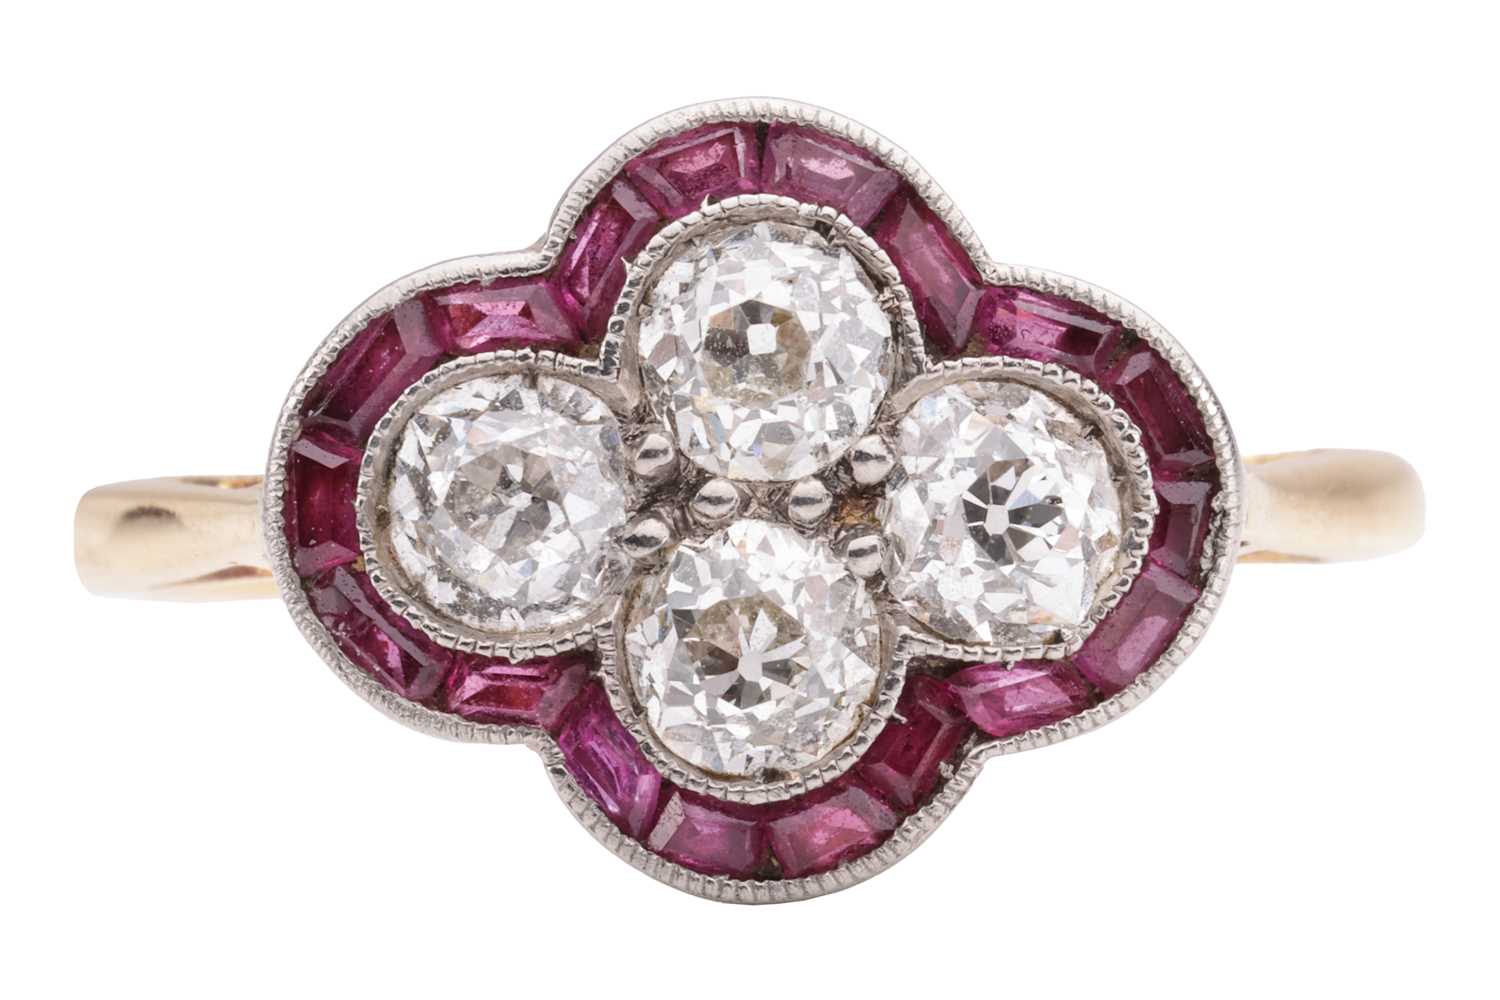 An Art Deco diamond and ruby quatrefoil ring, the panel is constructed by four old-cut diamonds with